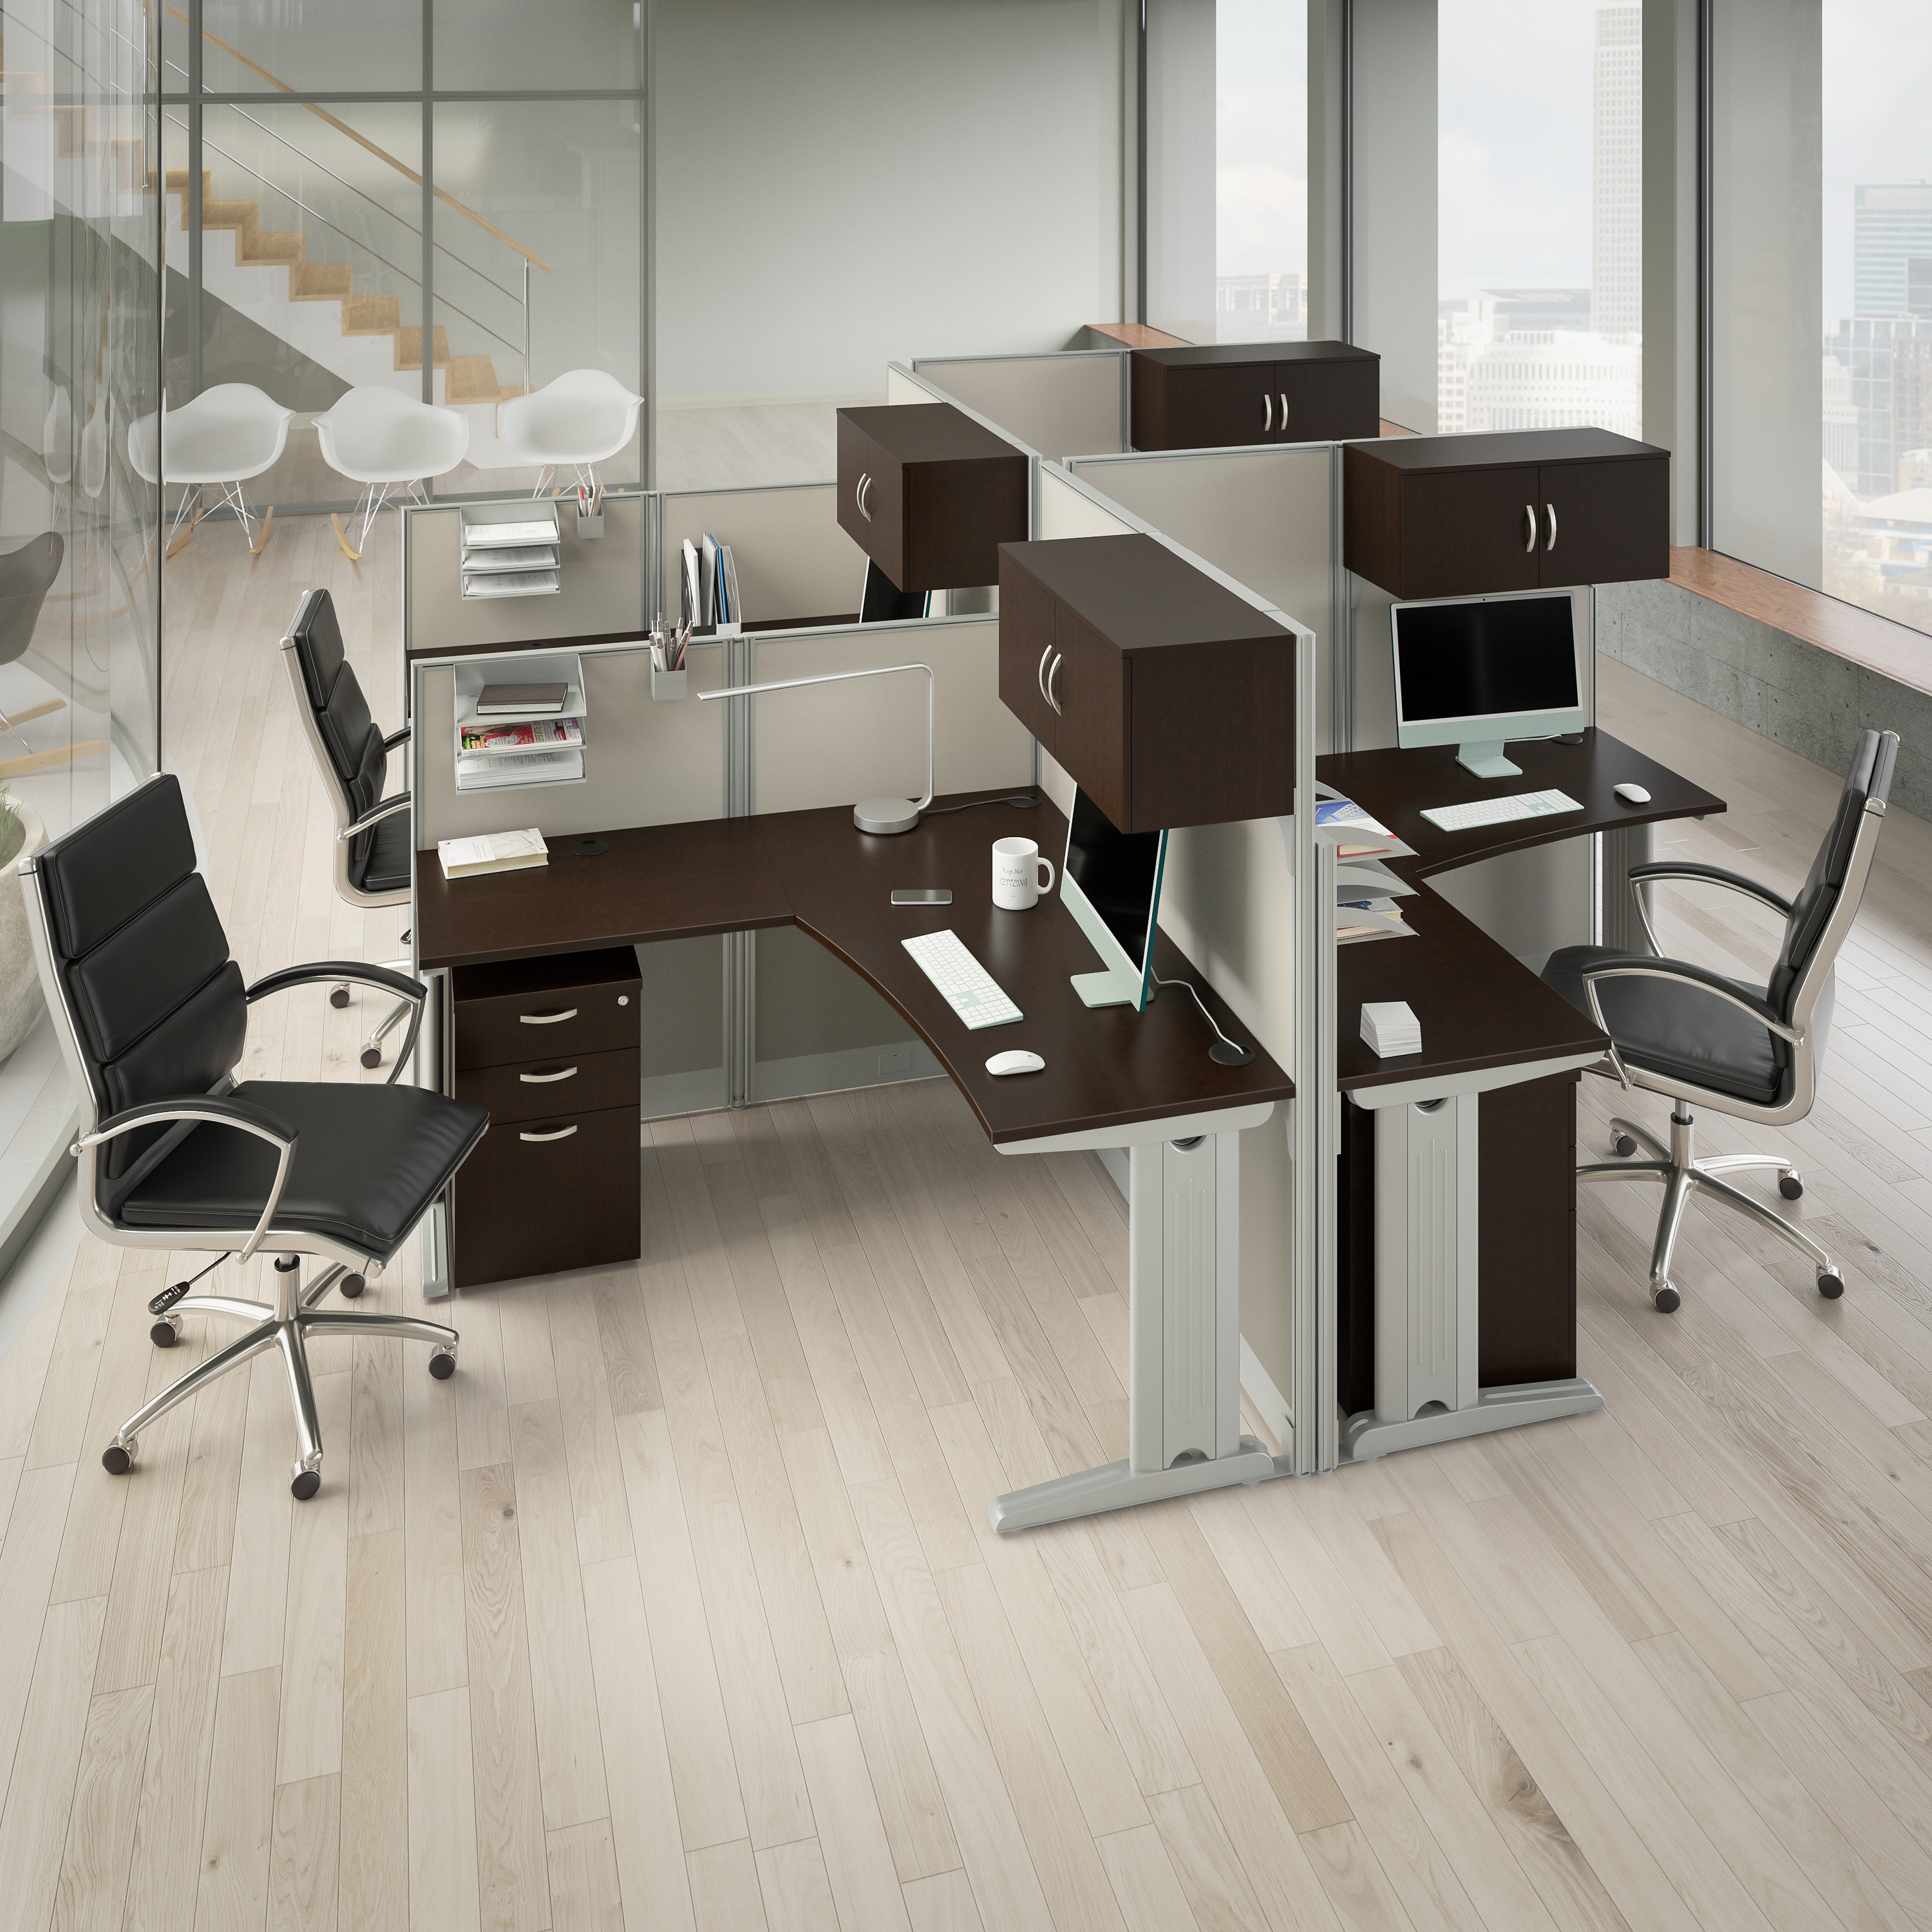 Shop Bush Business Furniture Office in an Hour Cubicle Storage with Cabinet, Drawers, Paper Tray, and Pencil Holder 08 WC36890-03K #color_mocha cherry